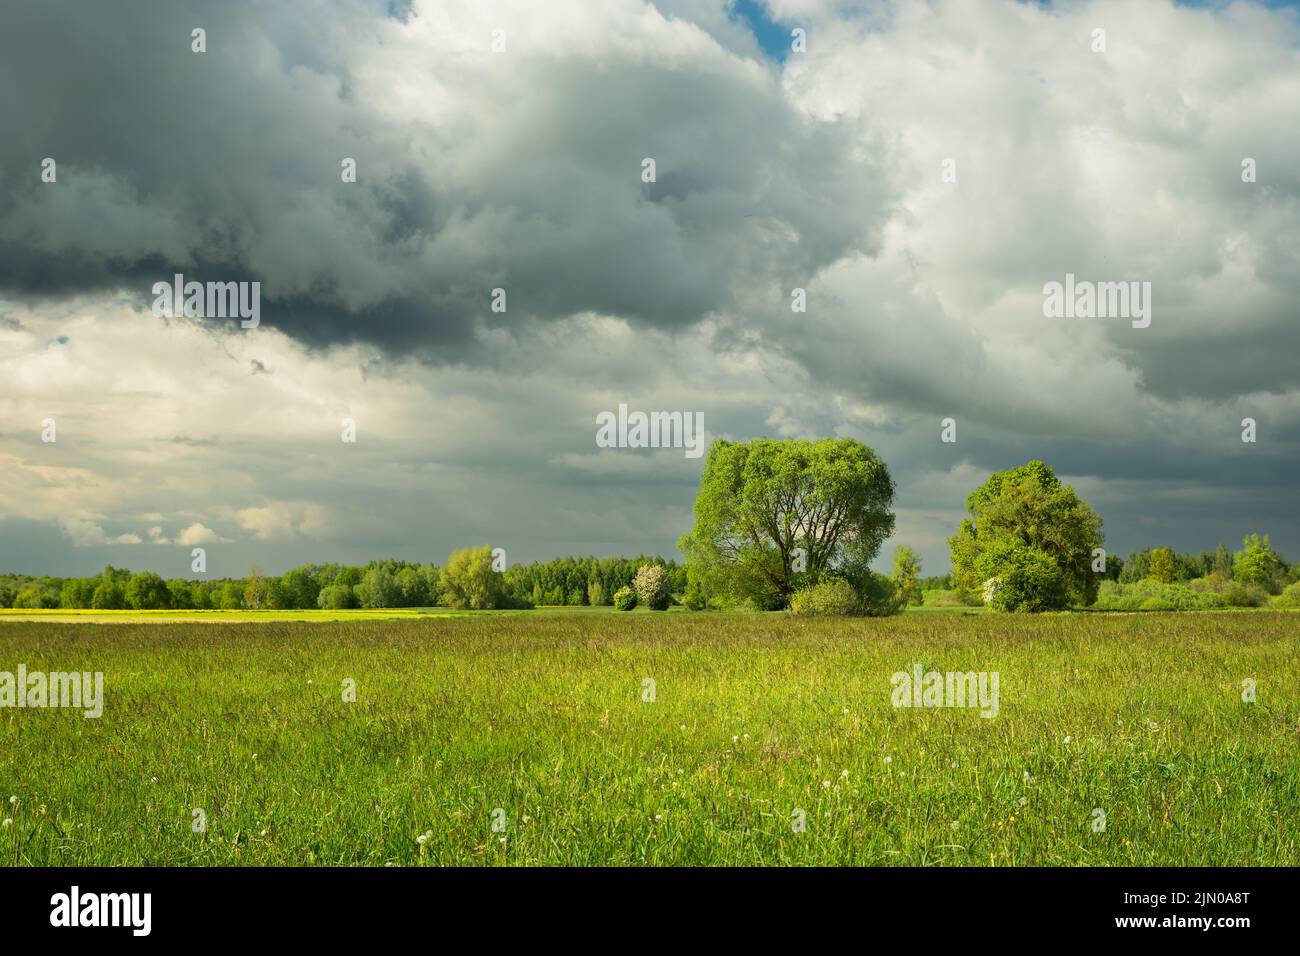 Cloudy sky over a green rural landscape, spring view Stock Photo